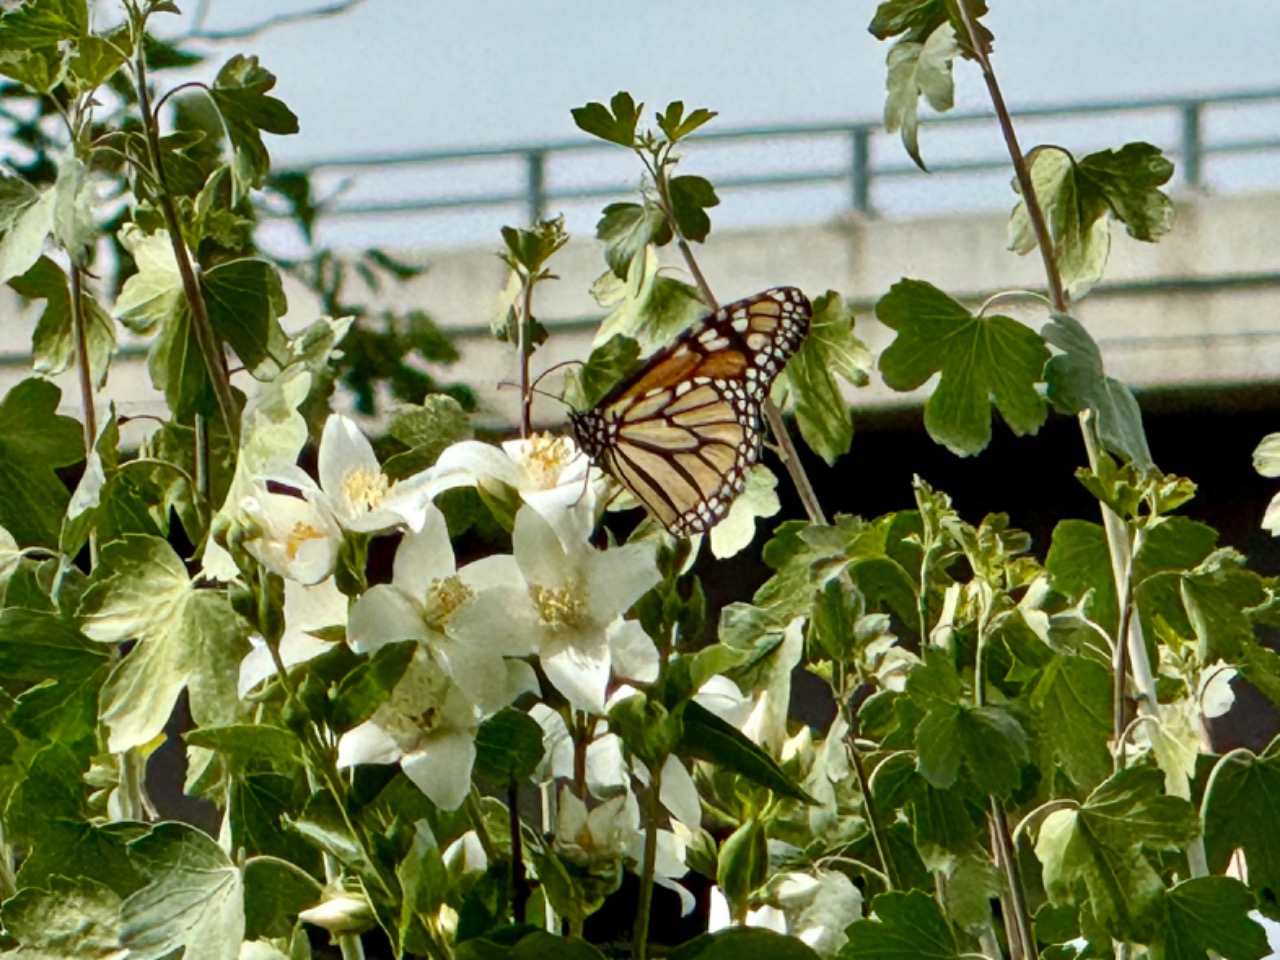 A monarch butterfly on a group of white flowers with a concrete bridge in the background